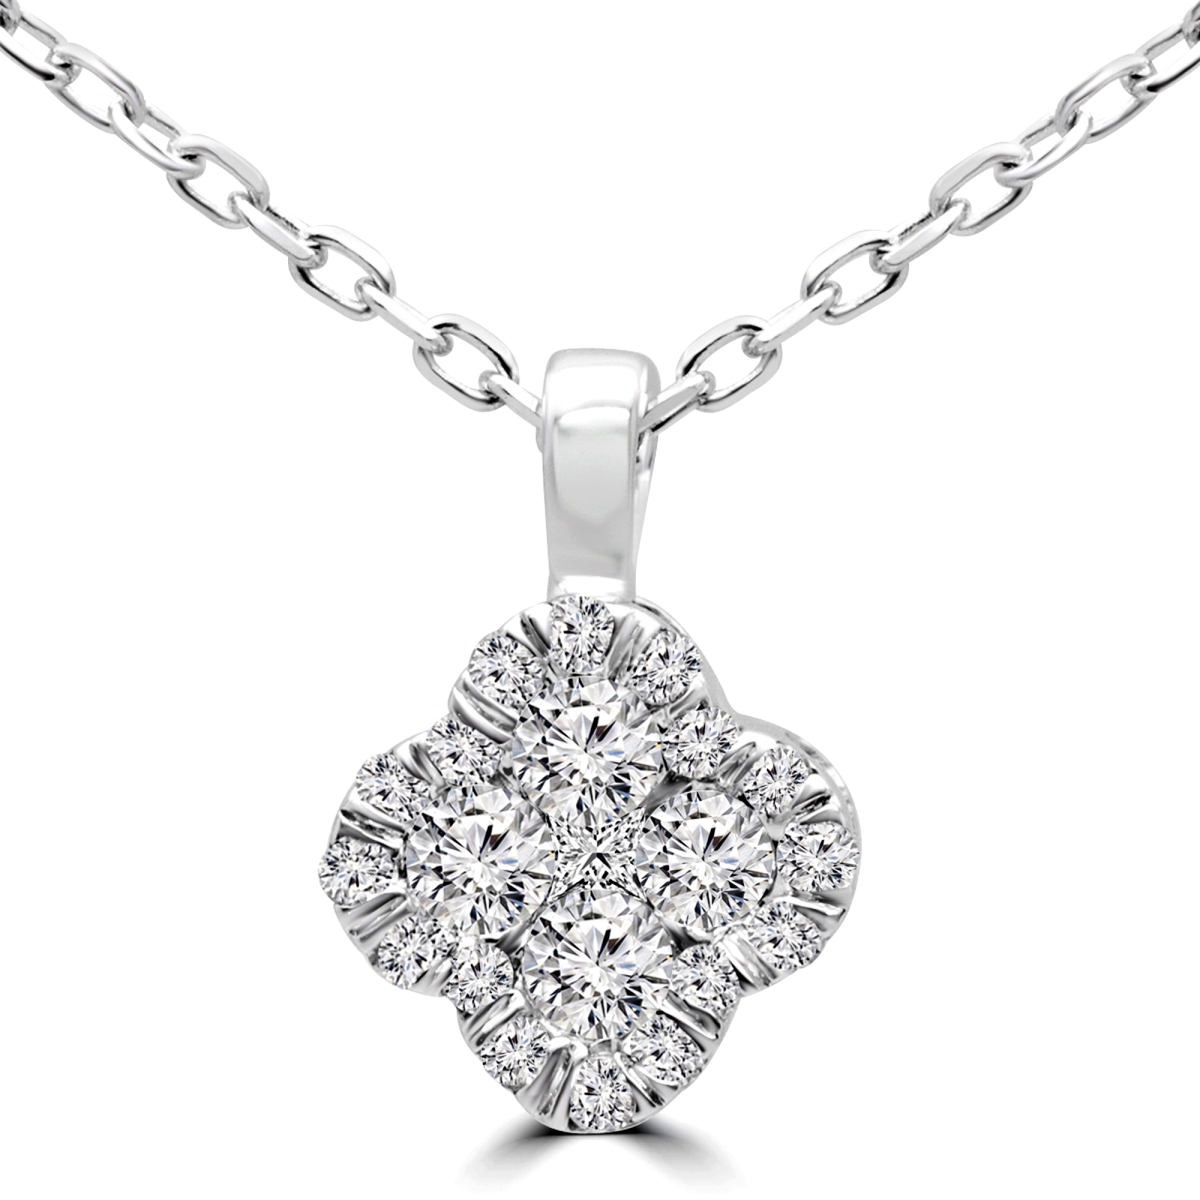 Mdr170165 0.16 Ctw Round Diamond Cluster Pendant Necklace In 14k